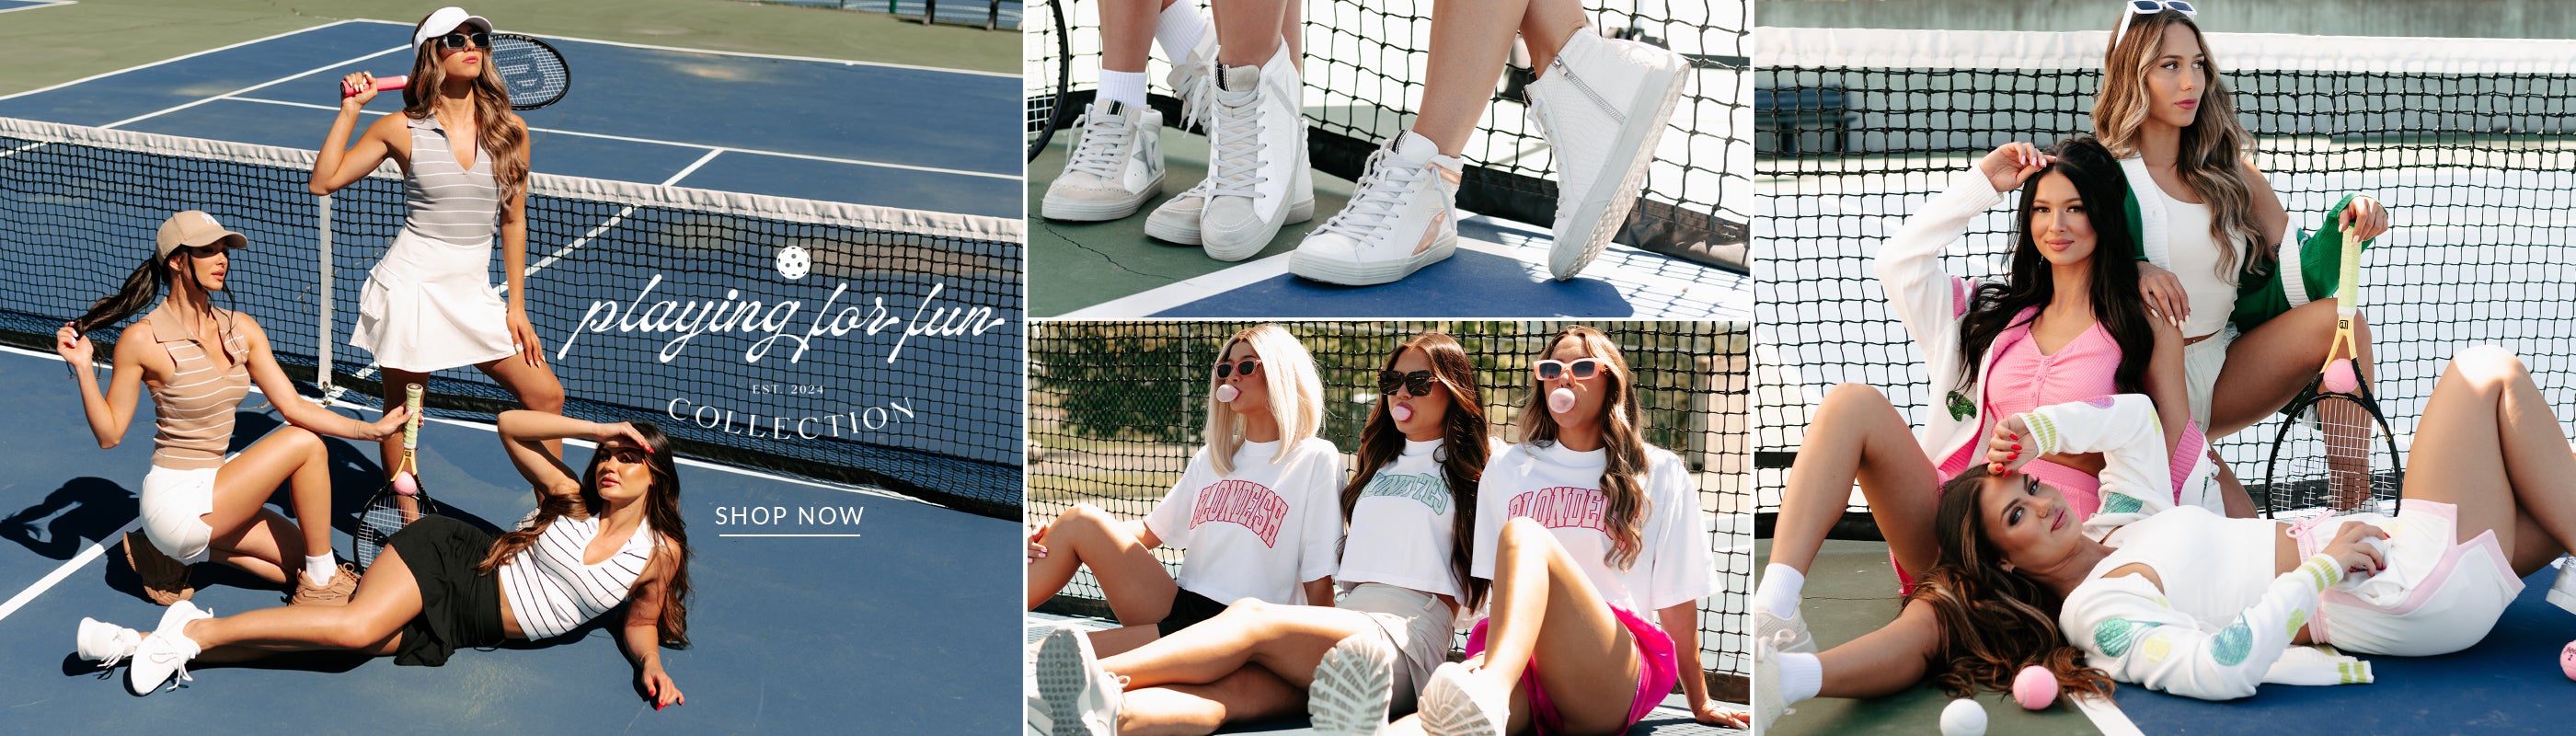 collage of models wearing tennis and pickleball outfits. Headline says "Playing For Fun Collection". Call to Action says "Shop Now" and links to the Tennis Collection.